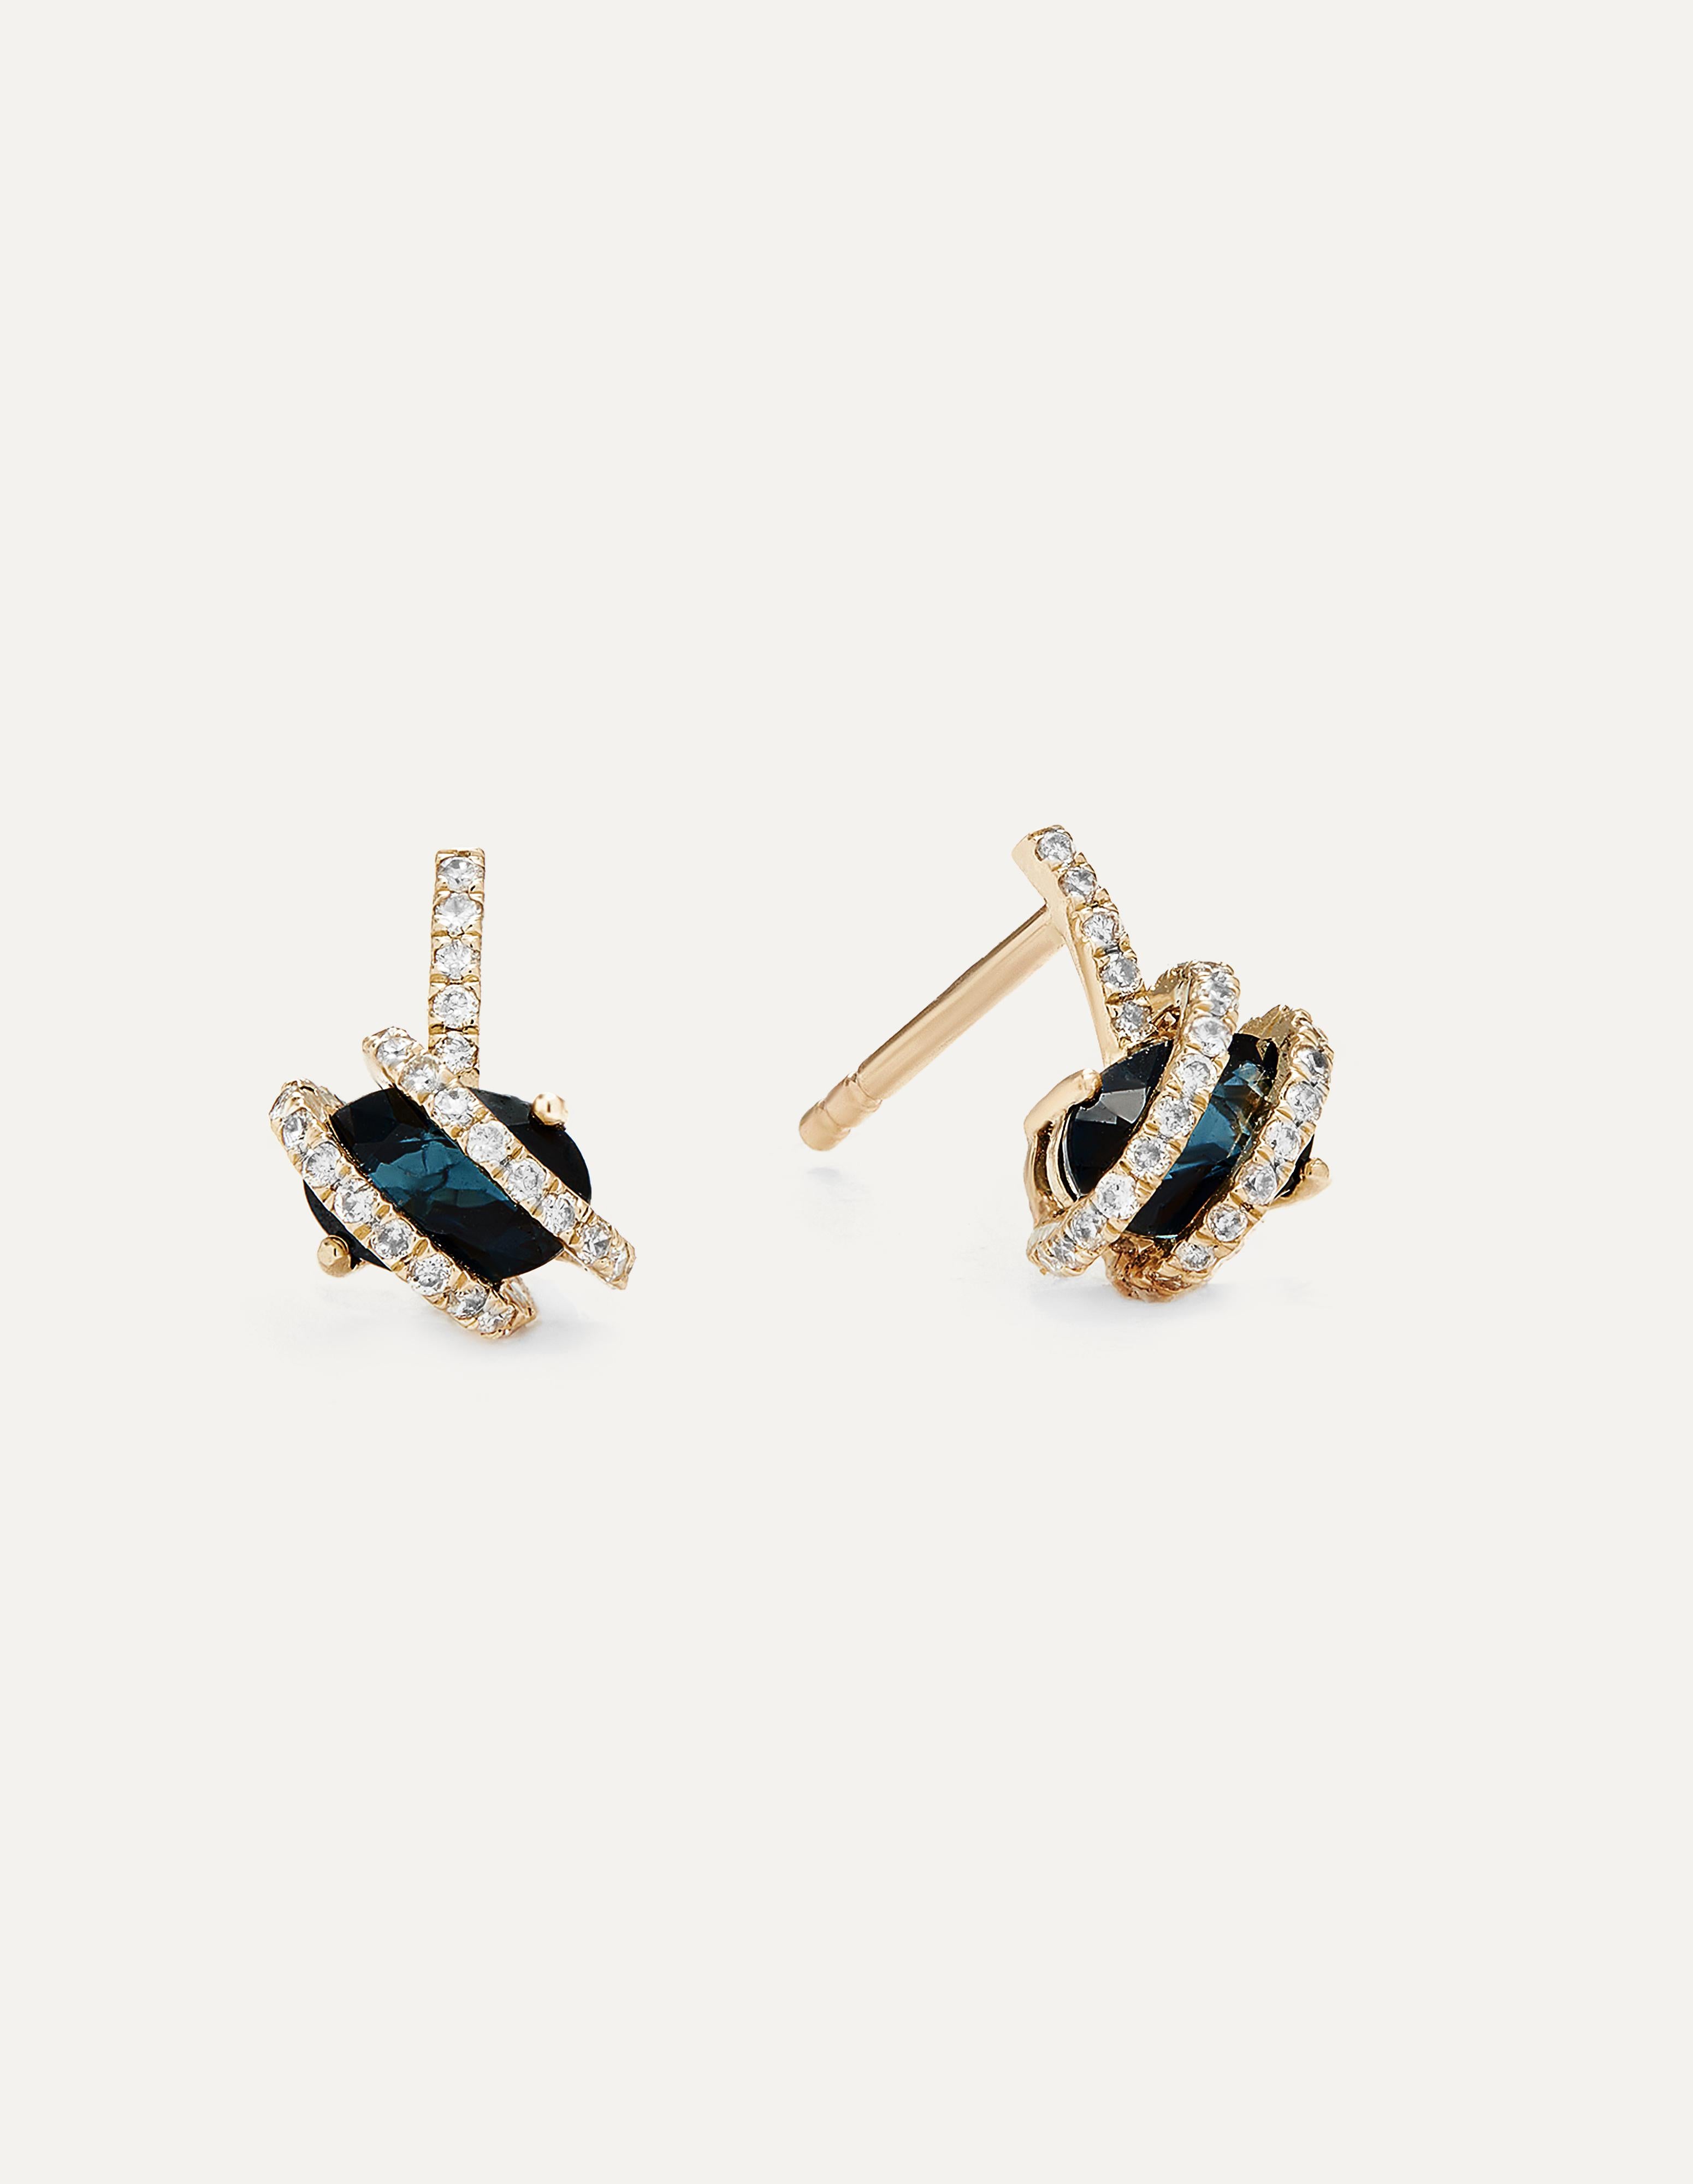 The Oval Sapphire Diamond Wrap Studs in 14k yellow gold are a stunning embodiment of nature's beauty and luxury. These stud earrings feature a captivating design, where lustrous oval sapphires are cradled by a wrap of brilliant white diamonds,